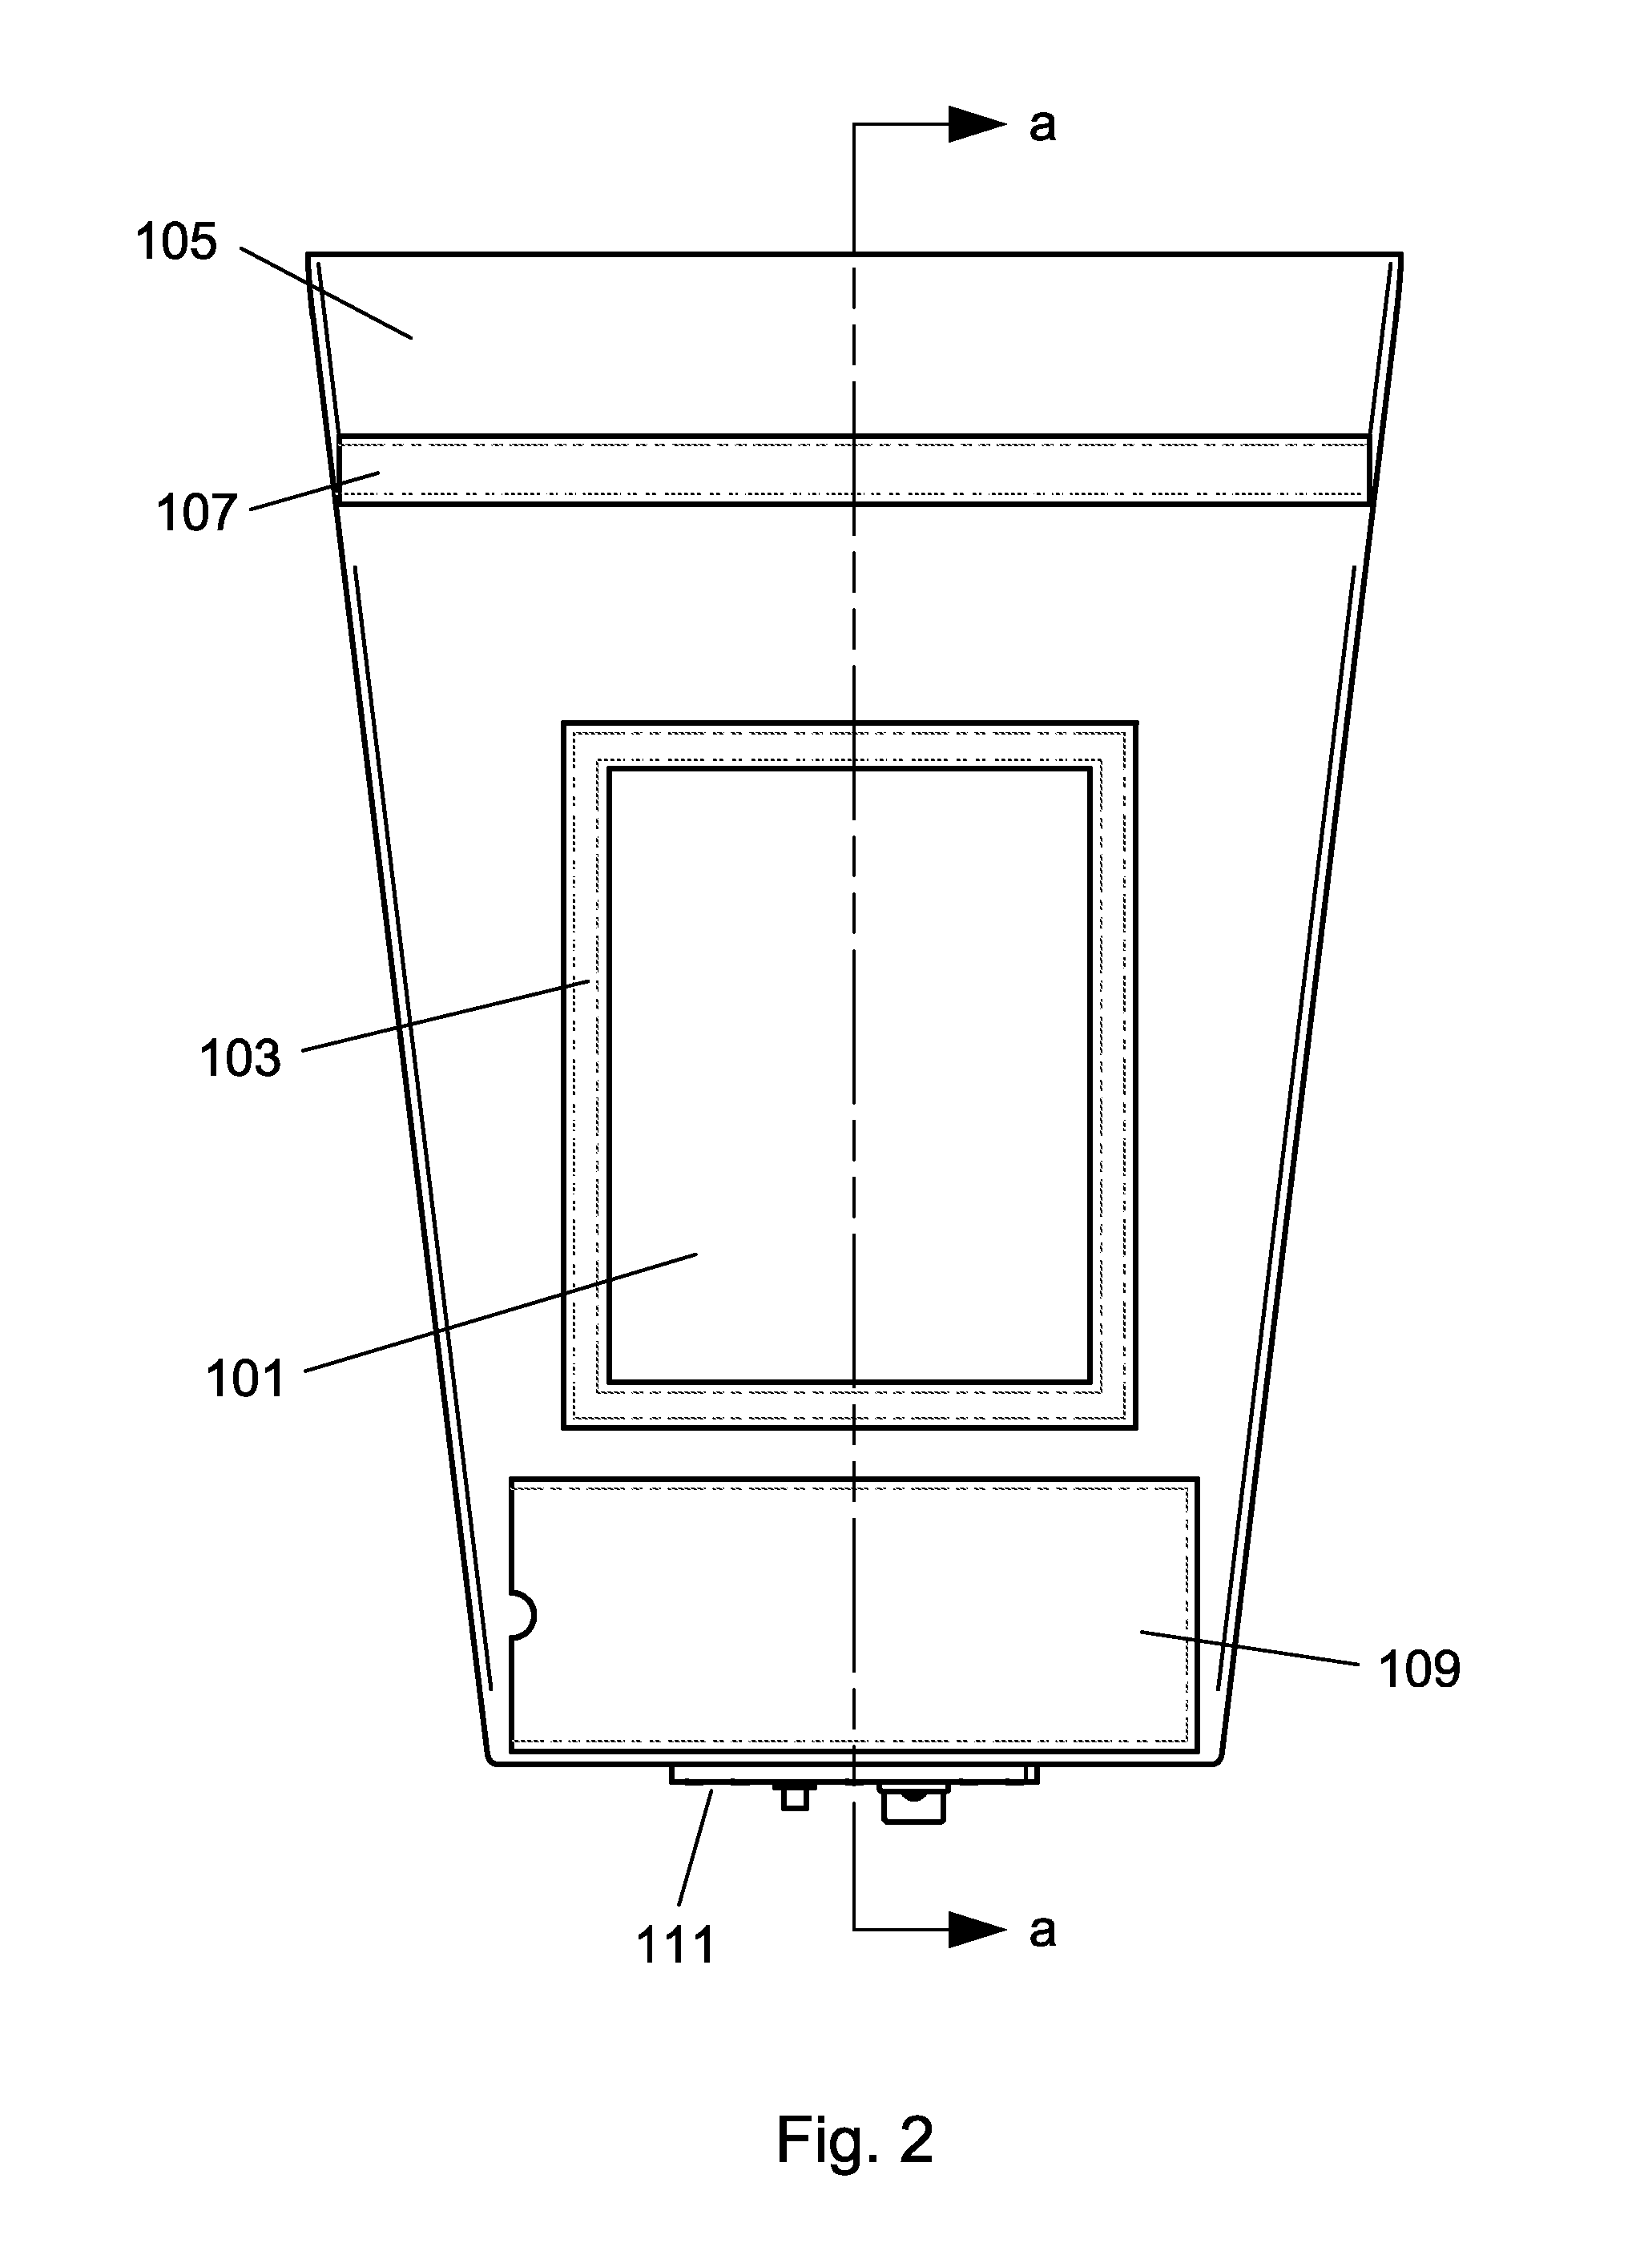 Electromagnetically shielded enclosure with operable interfaces